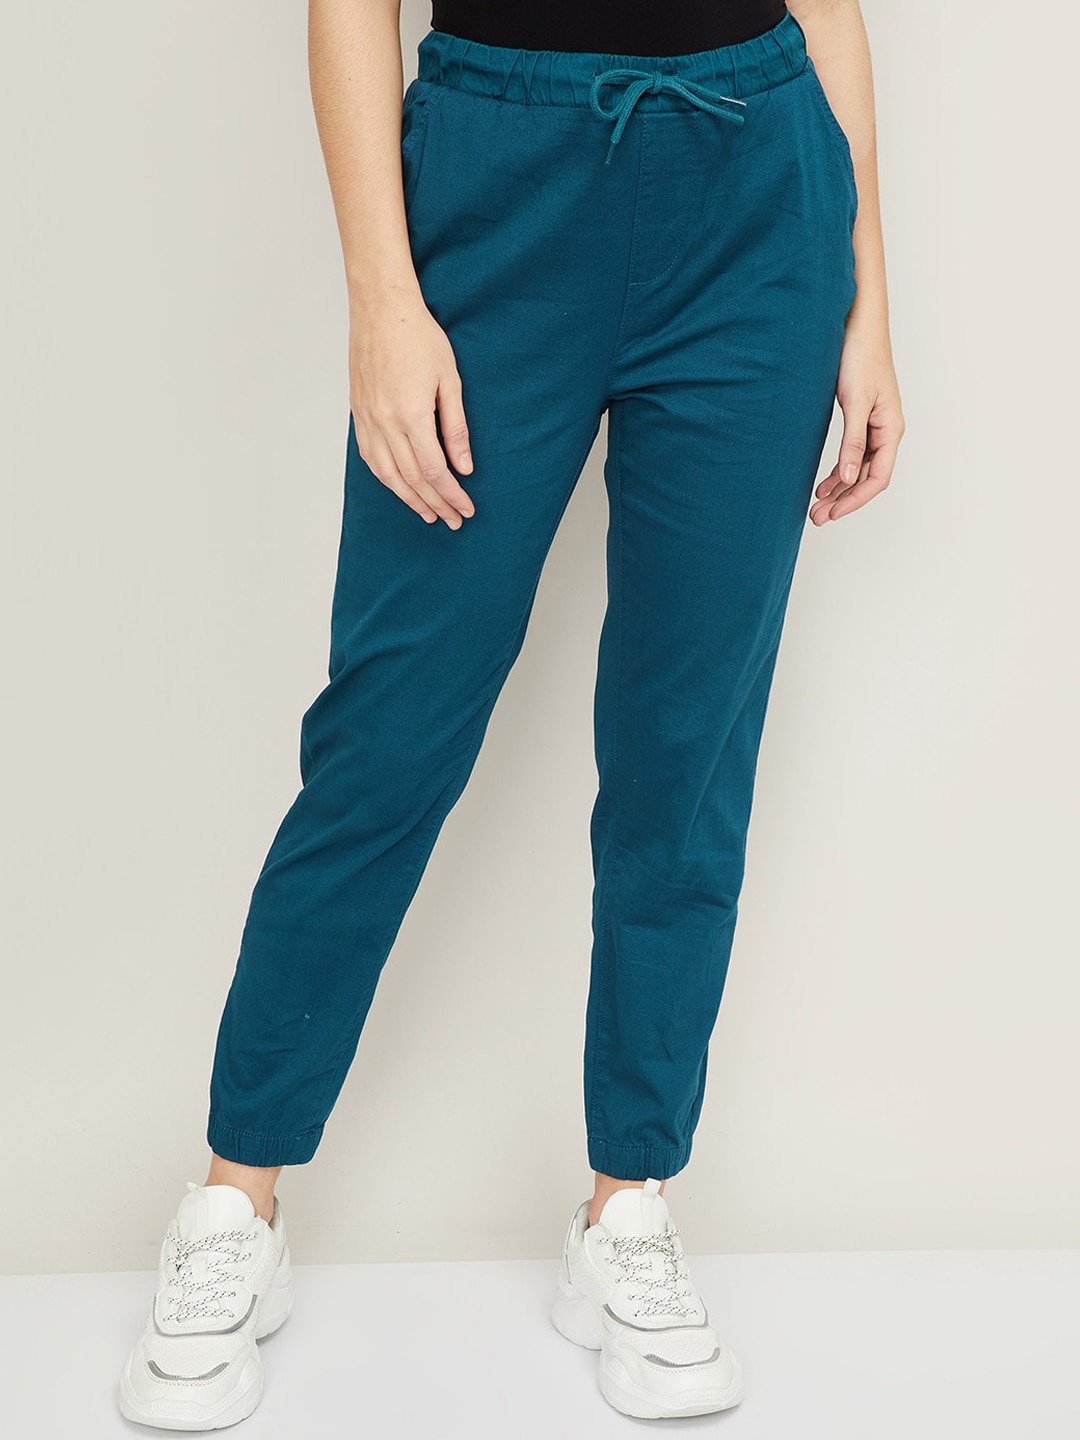 Bossini Women Teal Blue Cotton Joggers Price in India